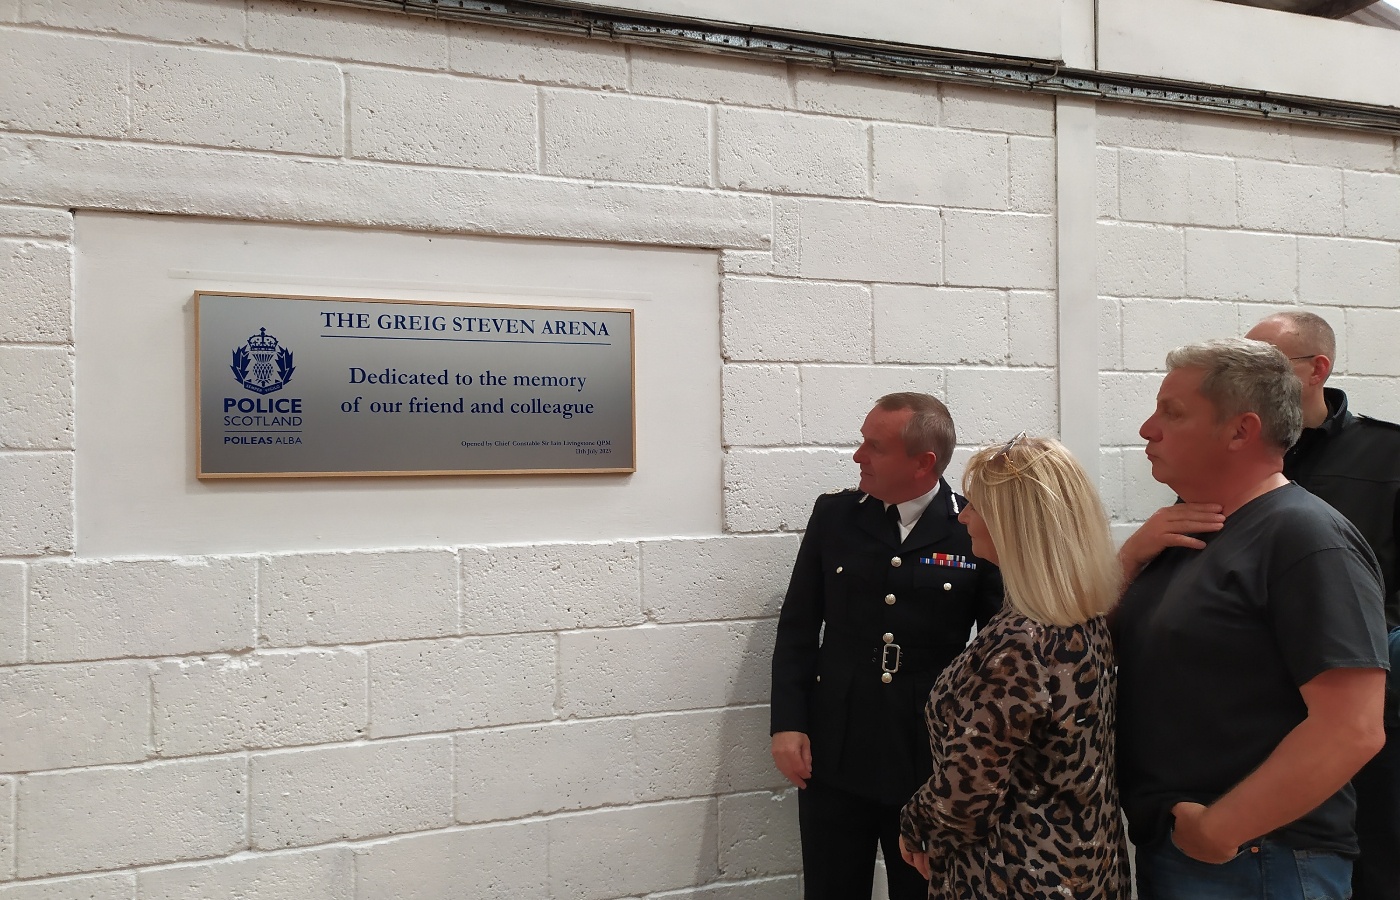 The new arena was opened by outgoing Chief Constable Sir Iain Livingstone